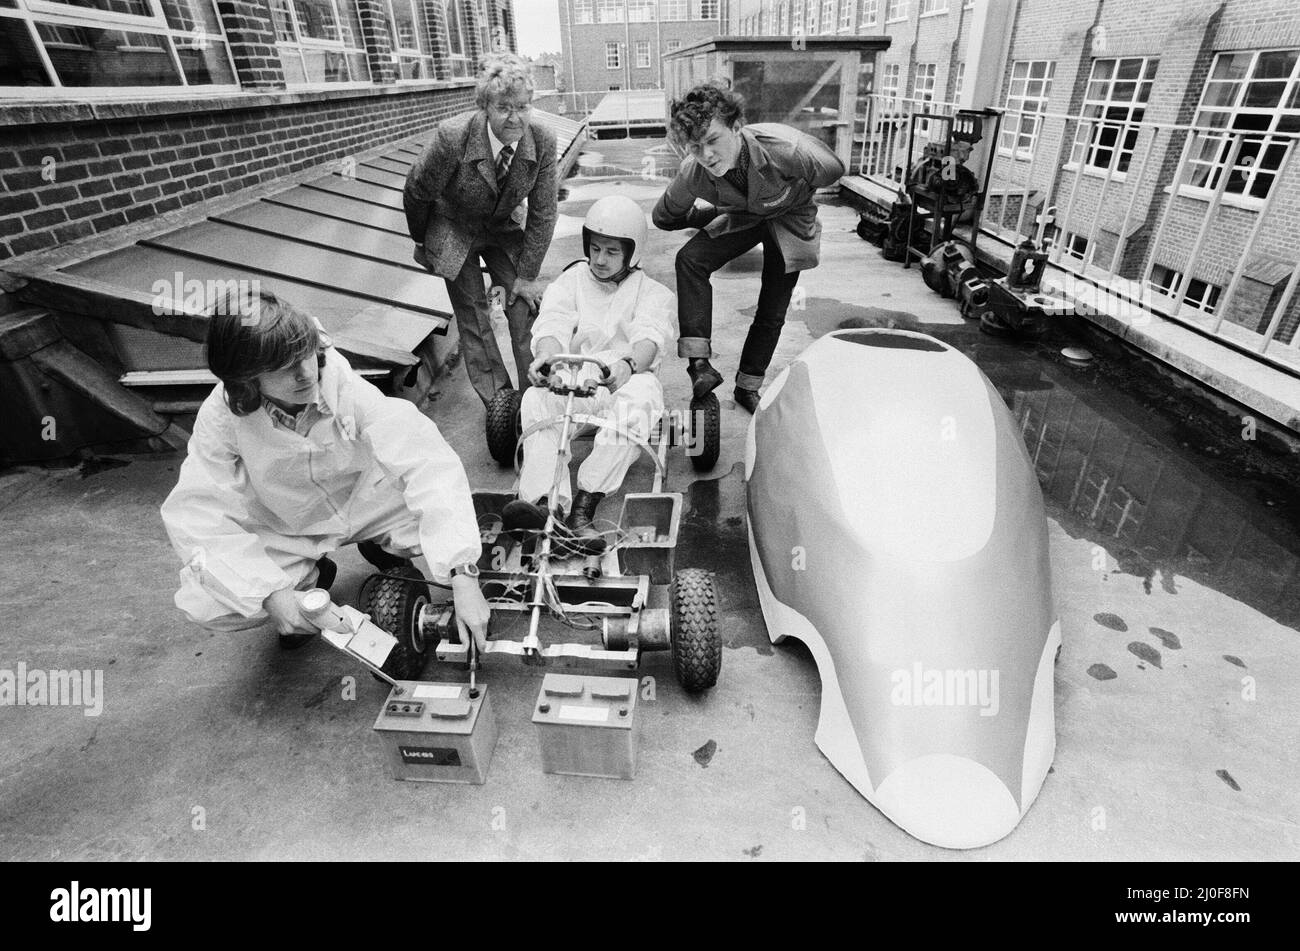 Picture shows students and lecturer at Garretts Green Technical College in Birmingham pictured with their electric electronic car.  At work on the car Daryl Boardman (18) in foreground checks cars batteries, with Michael Parry (18) in drivers seat, also in the picture are Mr. John West, lecturer at the collage on the Motor Vehicle Body Courses and 18 year old Paul Radcliffe.  Photo taken 15th August 1979. Stock Photo